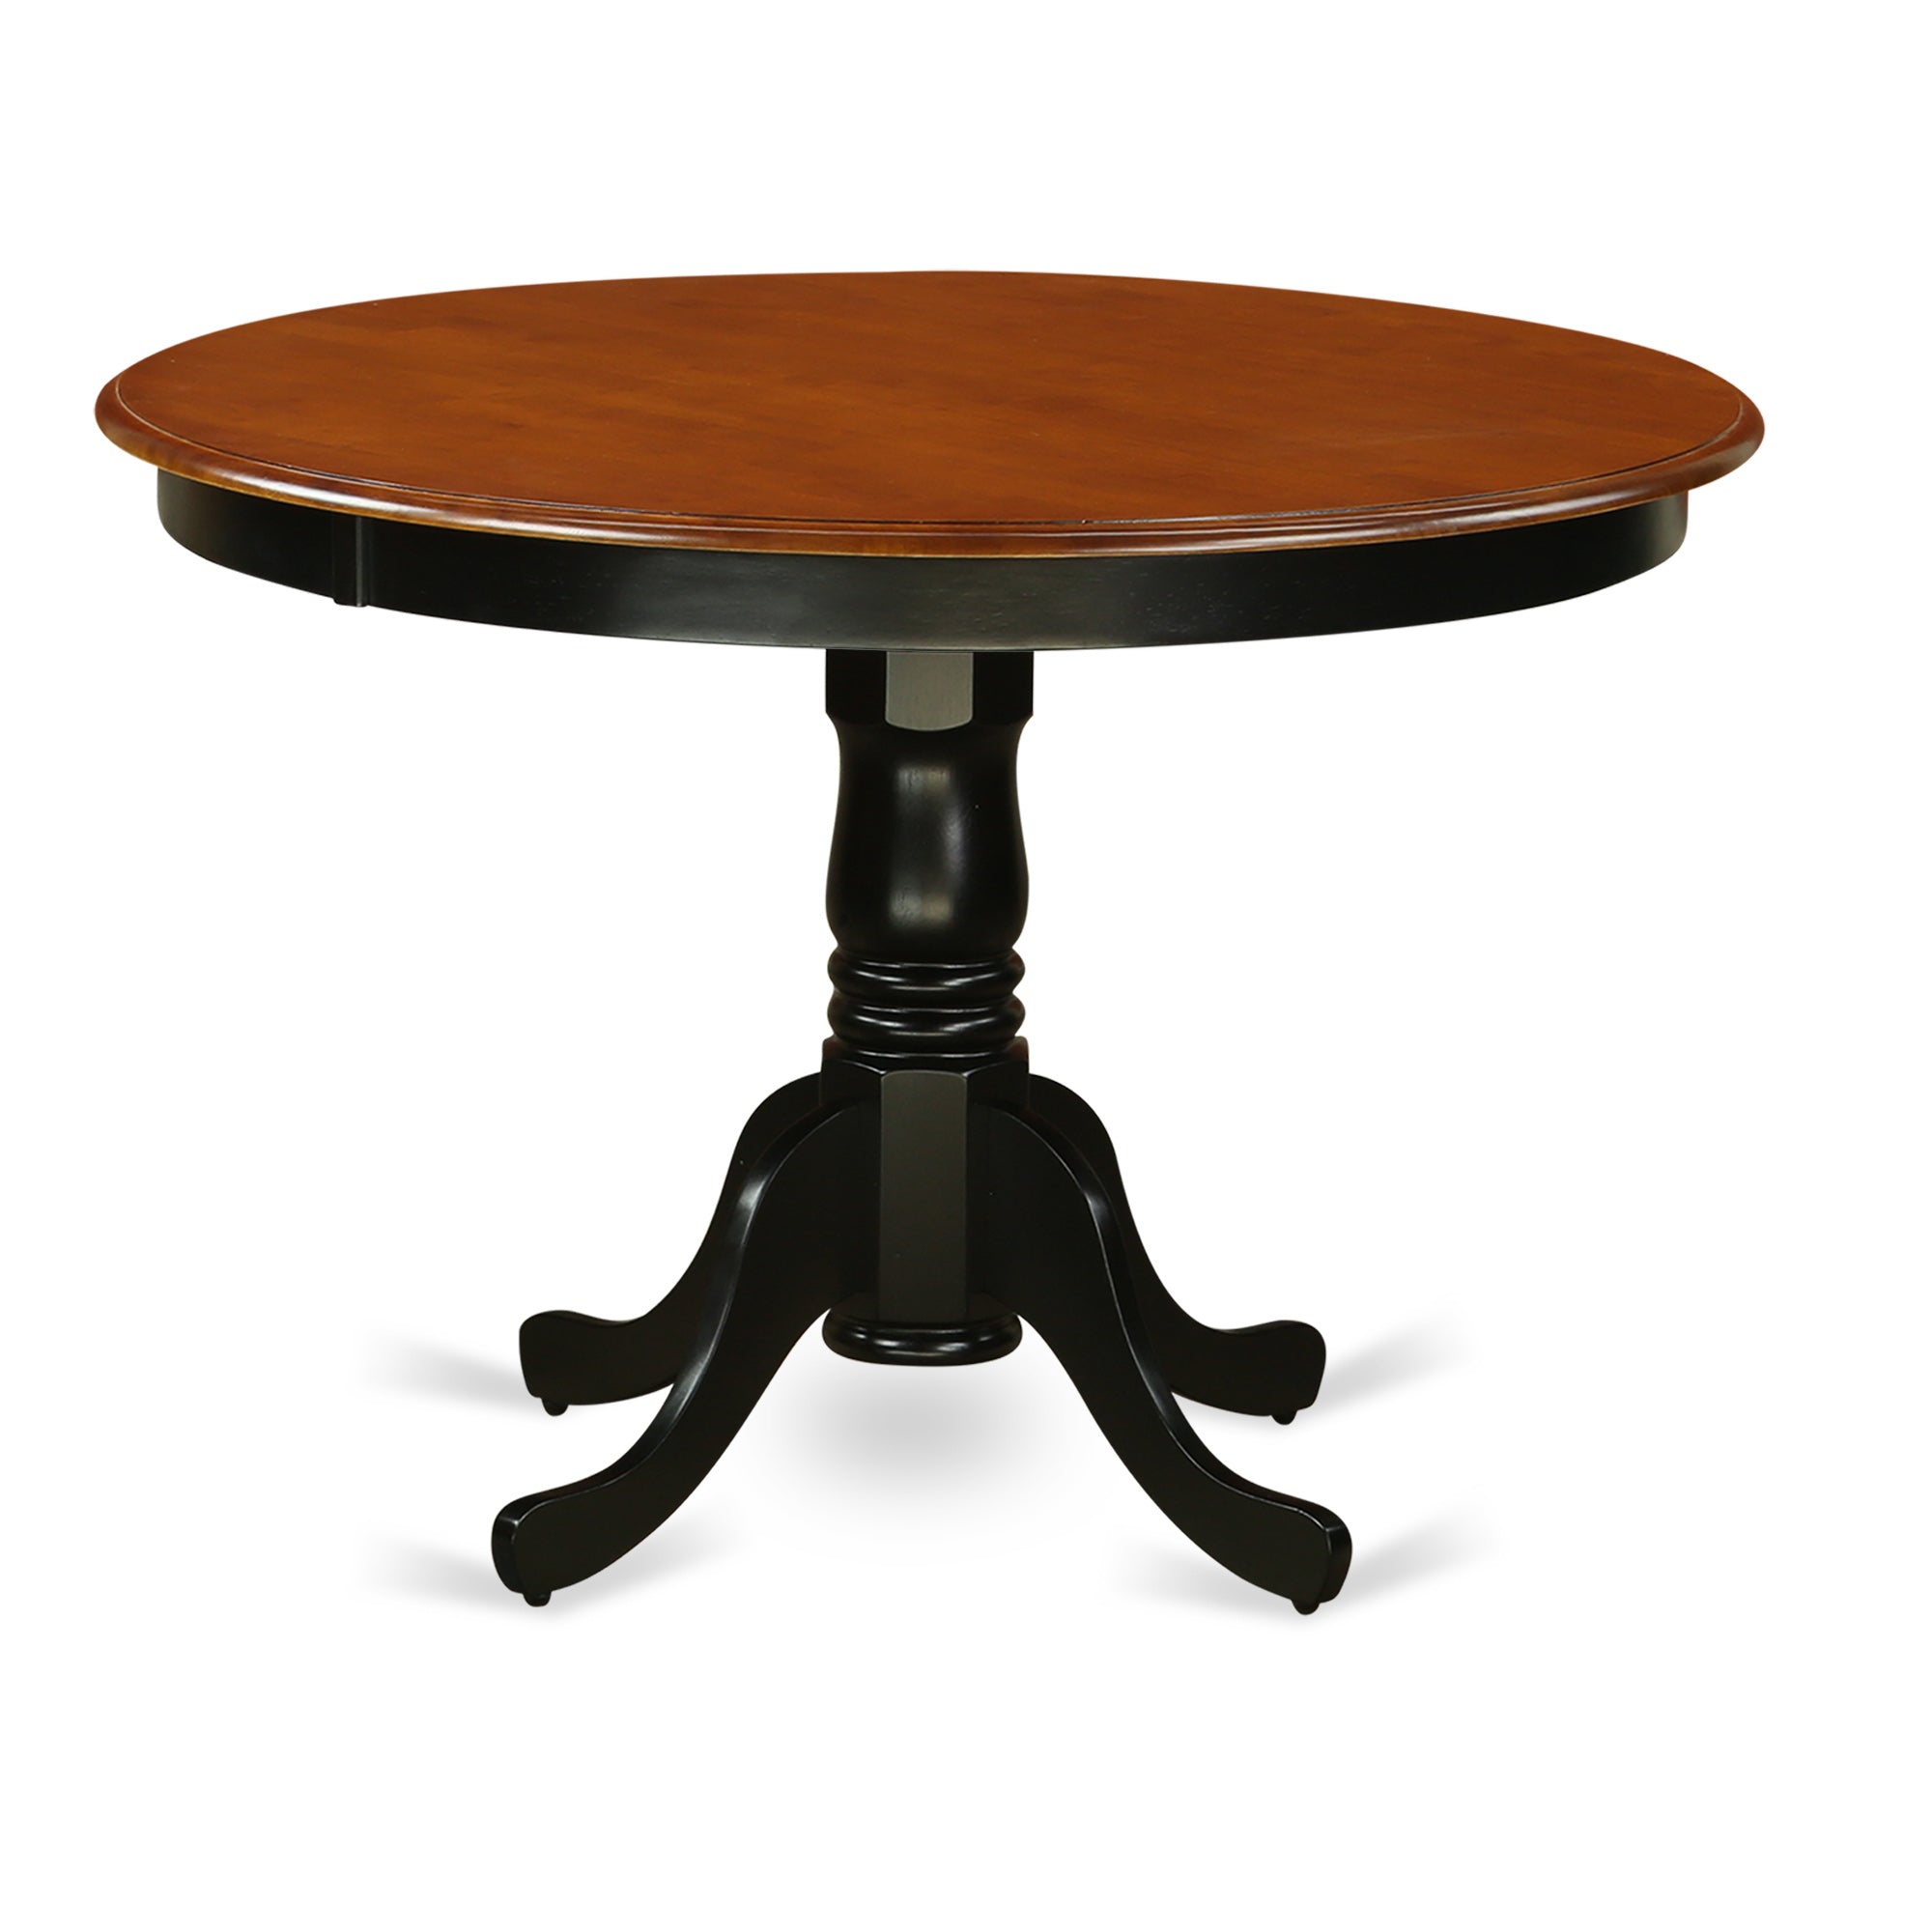 HLPF3-BCH-W 3 Pc set with a Round Small Table and 2 Leather Dinette Chairs in Black and Cherry